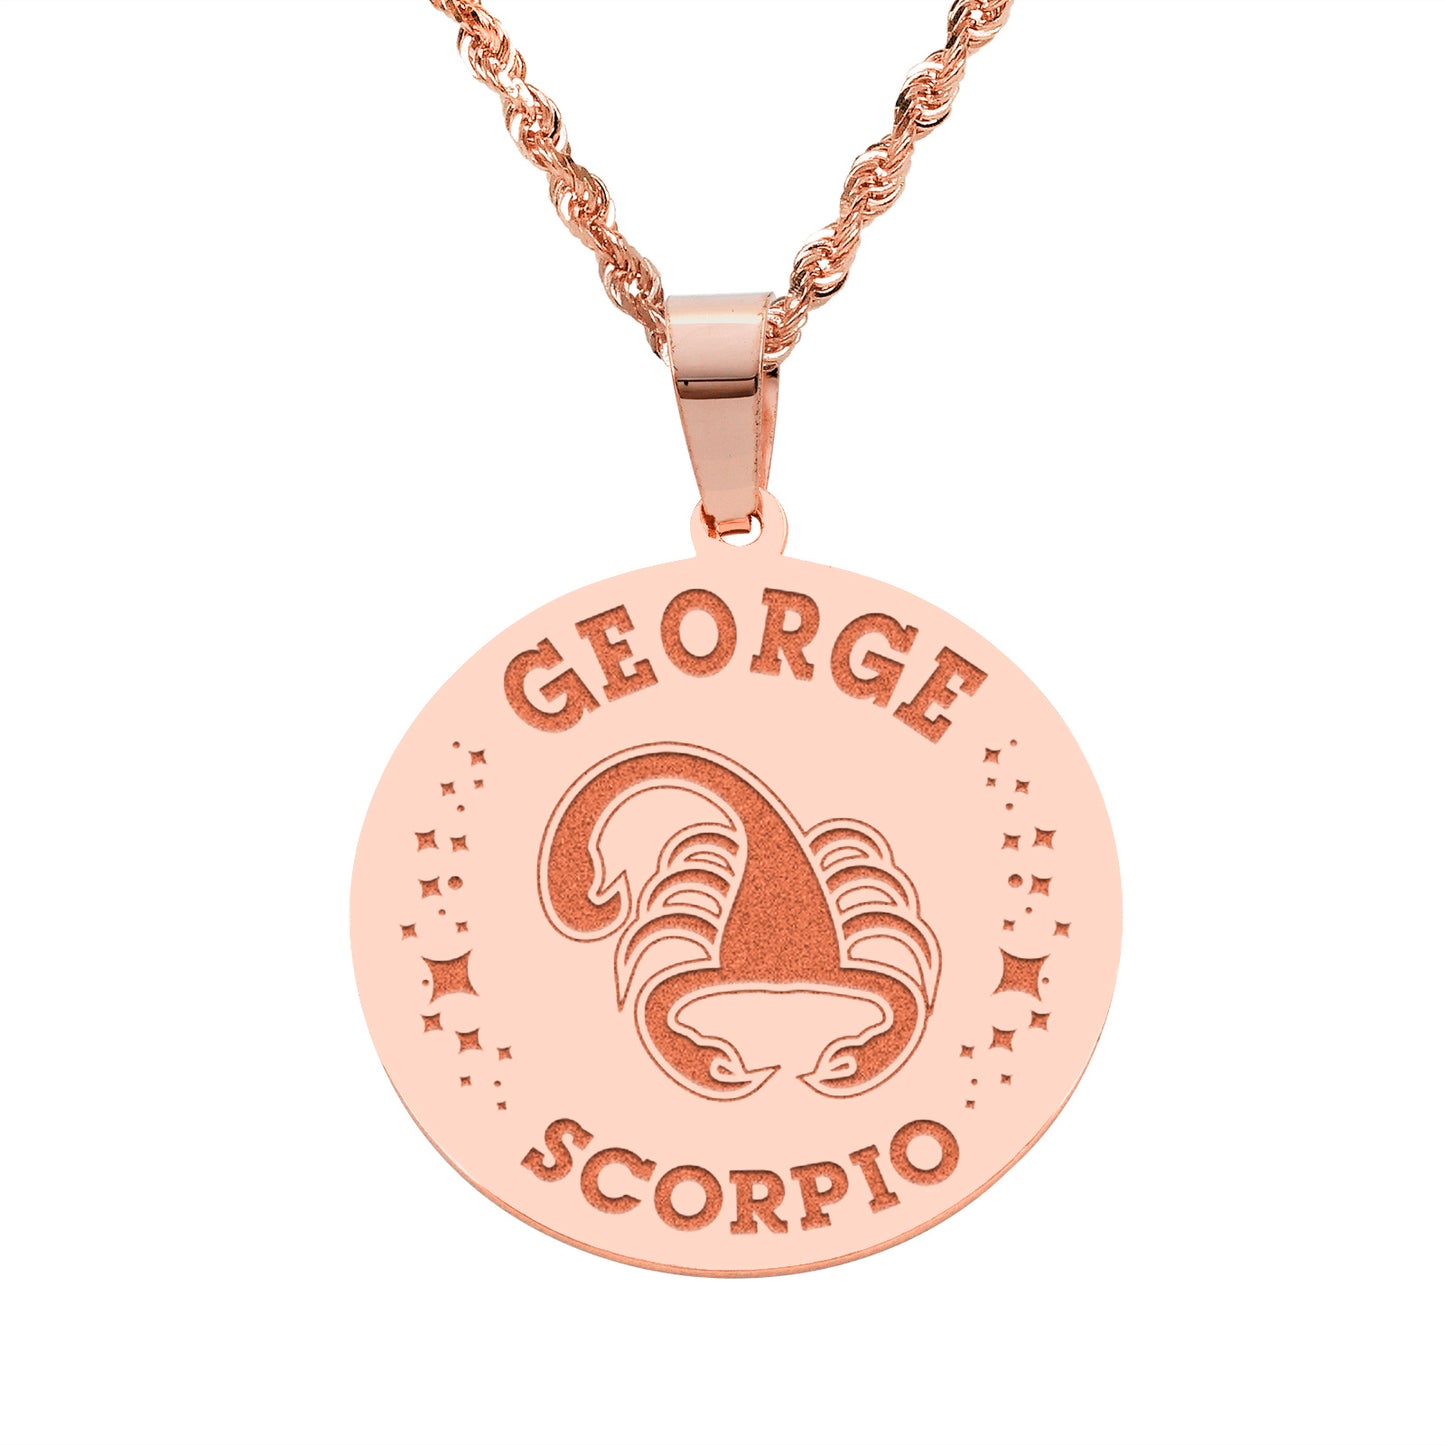 Zodiac Engraved Pendant with Customizable Name in High Polished 14K Gold | 0.75" Scorpio